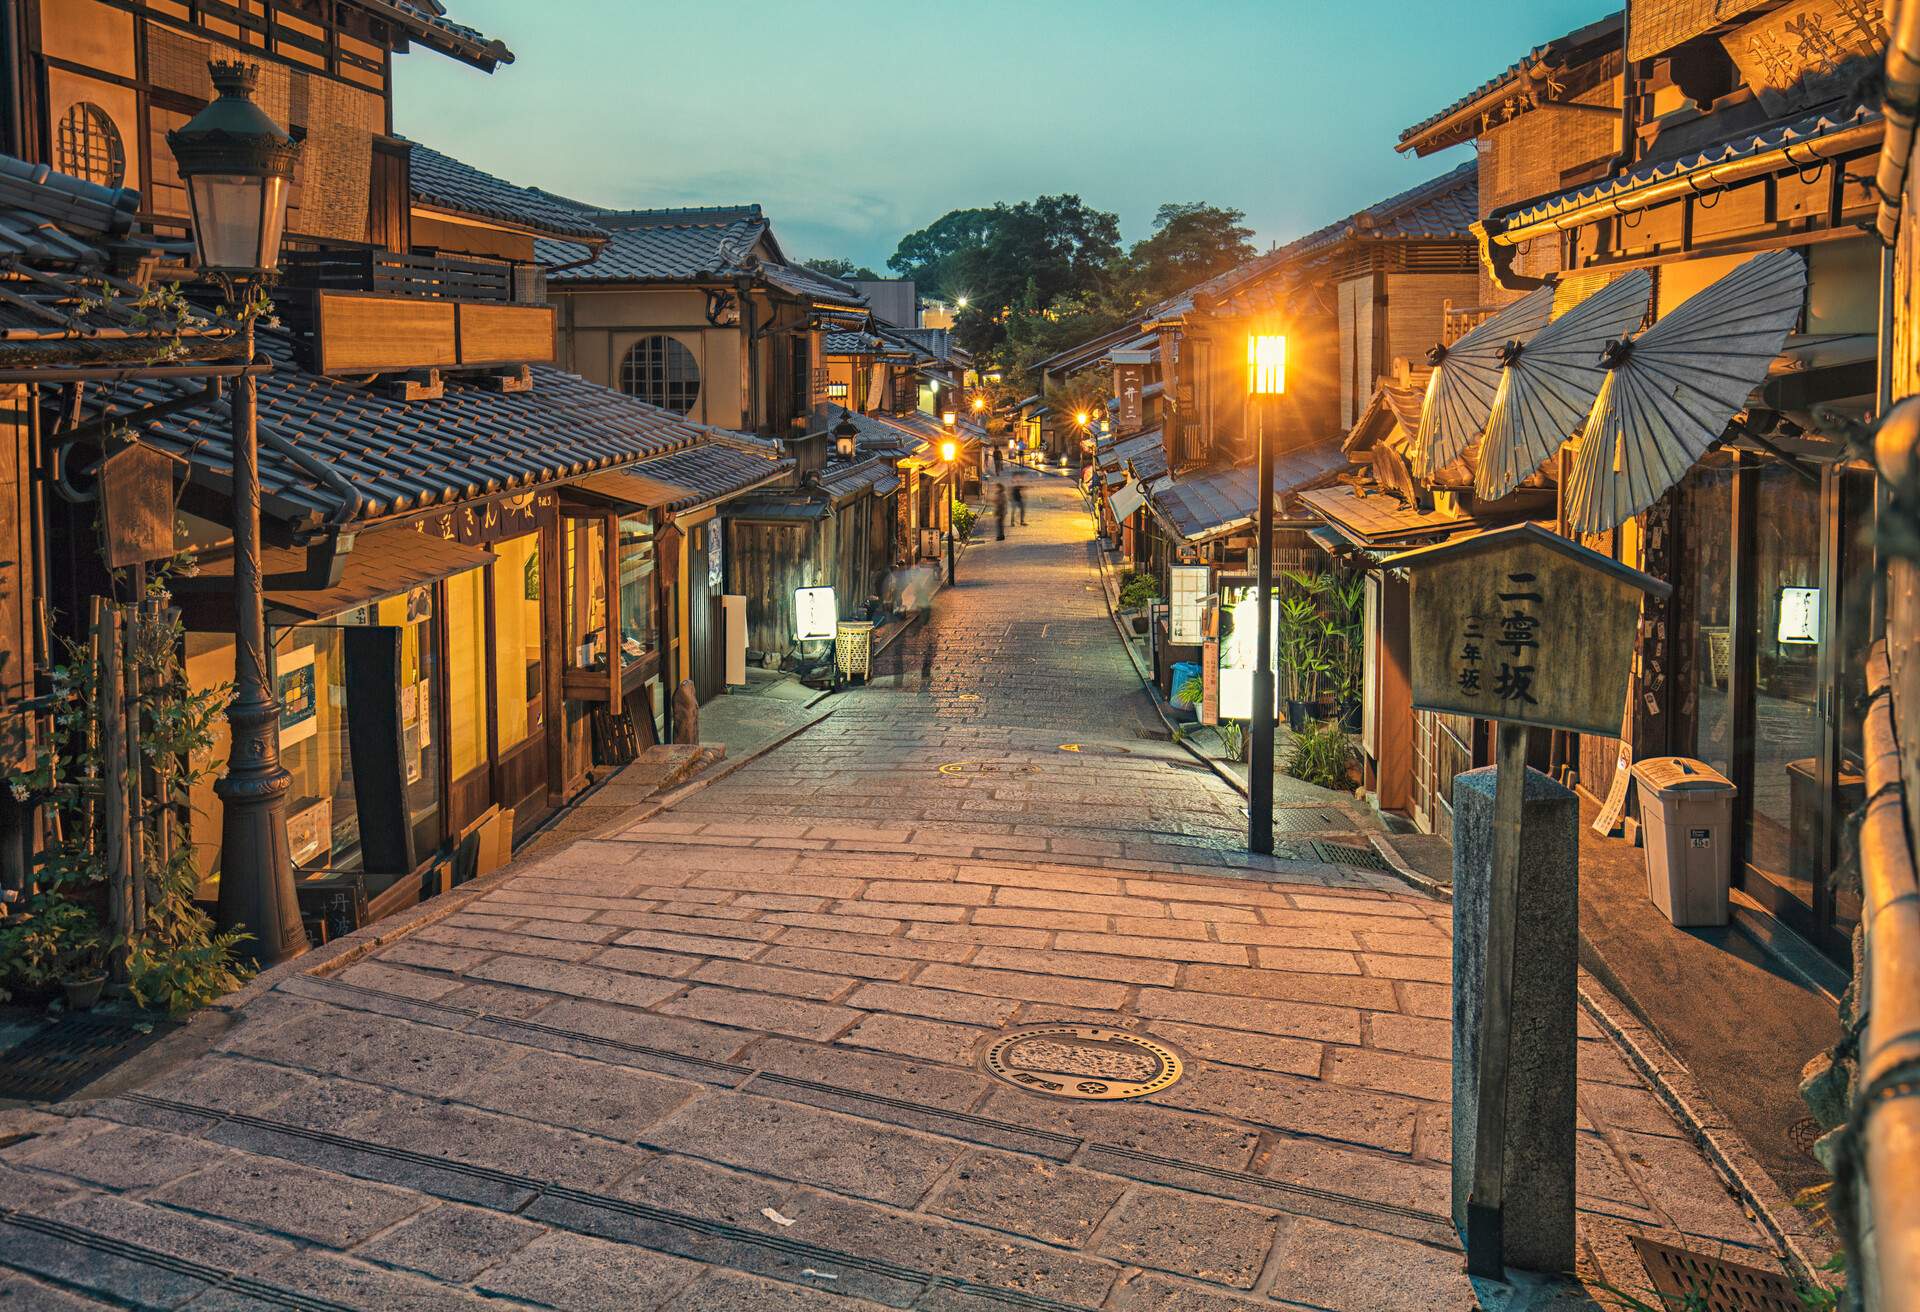 DEST_JAPAN_KYOTO_GION-DISTRICT_GettyImages-639805336